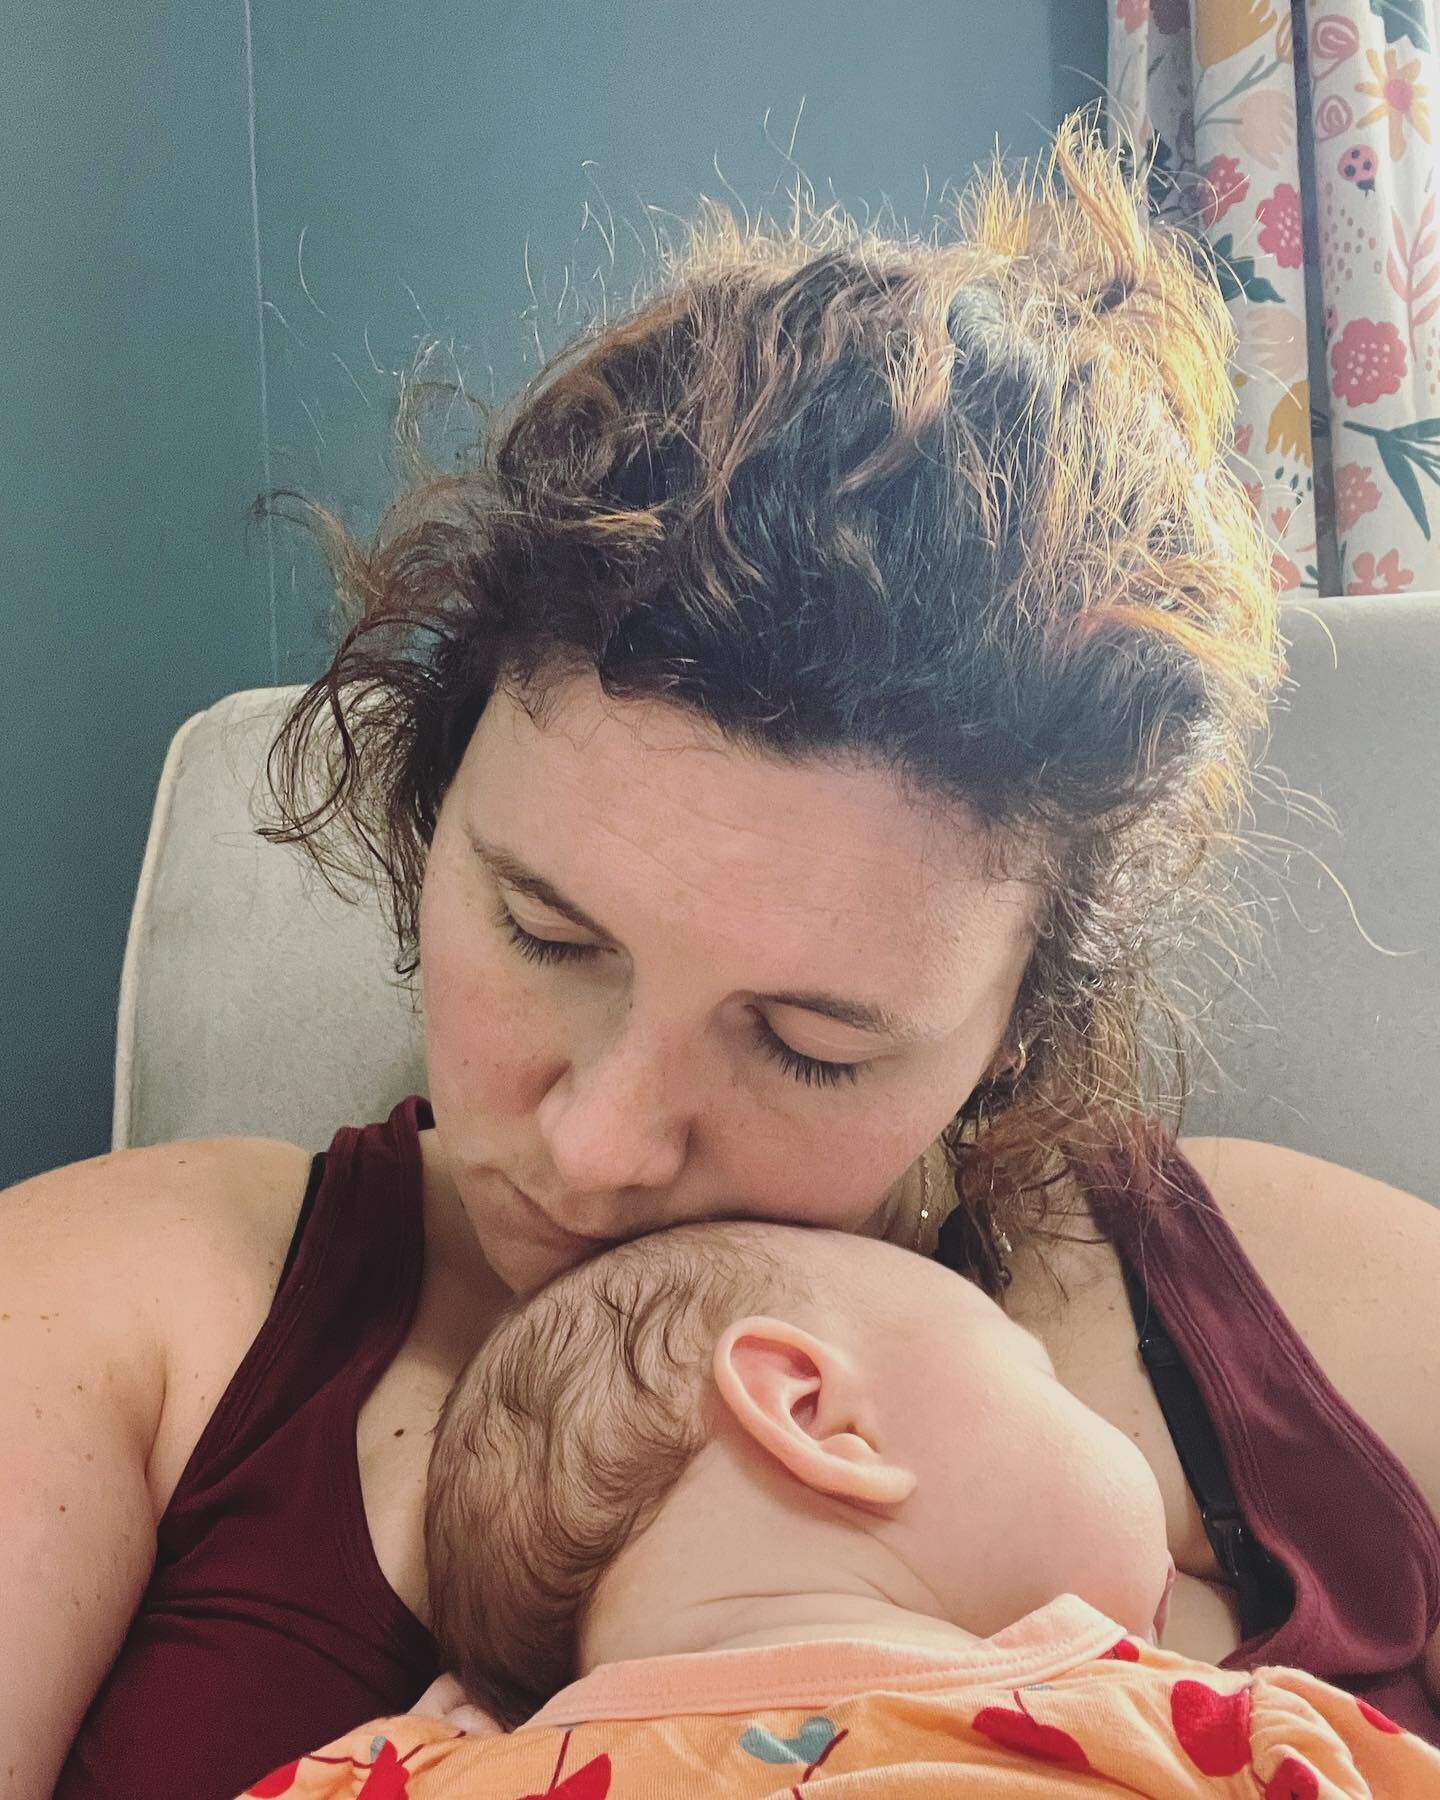 A poem from the newborn days:

Never has the saying
&lsquo;babies don&rsquo;t keep&rsquo;
felt more poignant
than when watch the two little babies
turned rambunctious boys
playing balloon keep-away
in the living room.

Our third curled sleeping on my